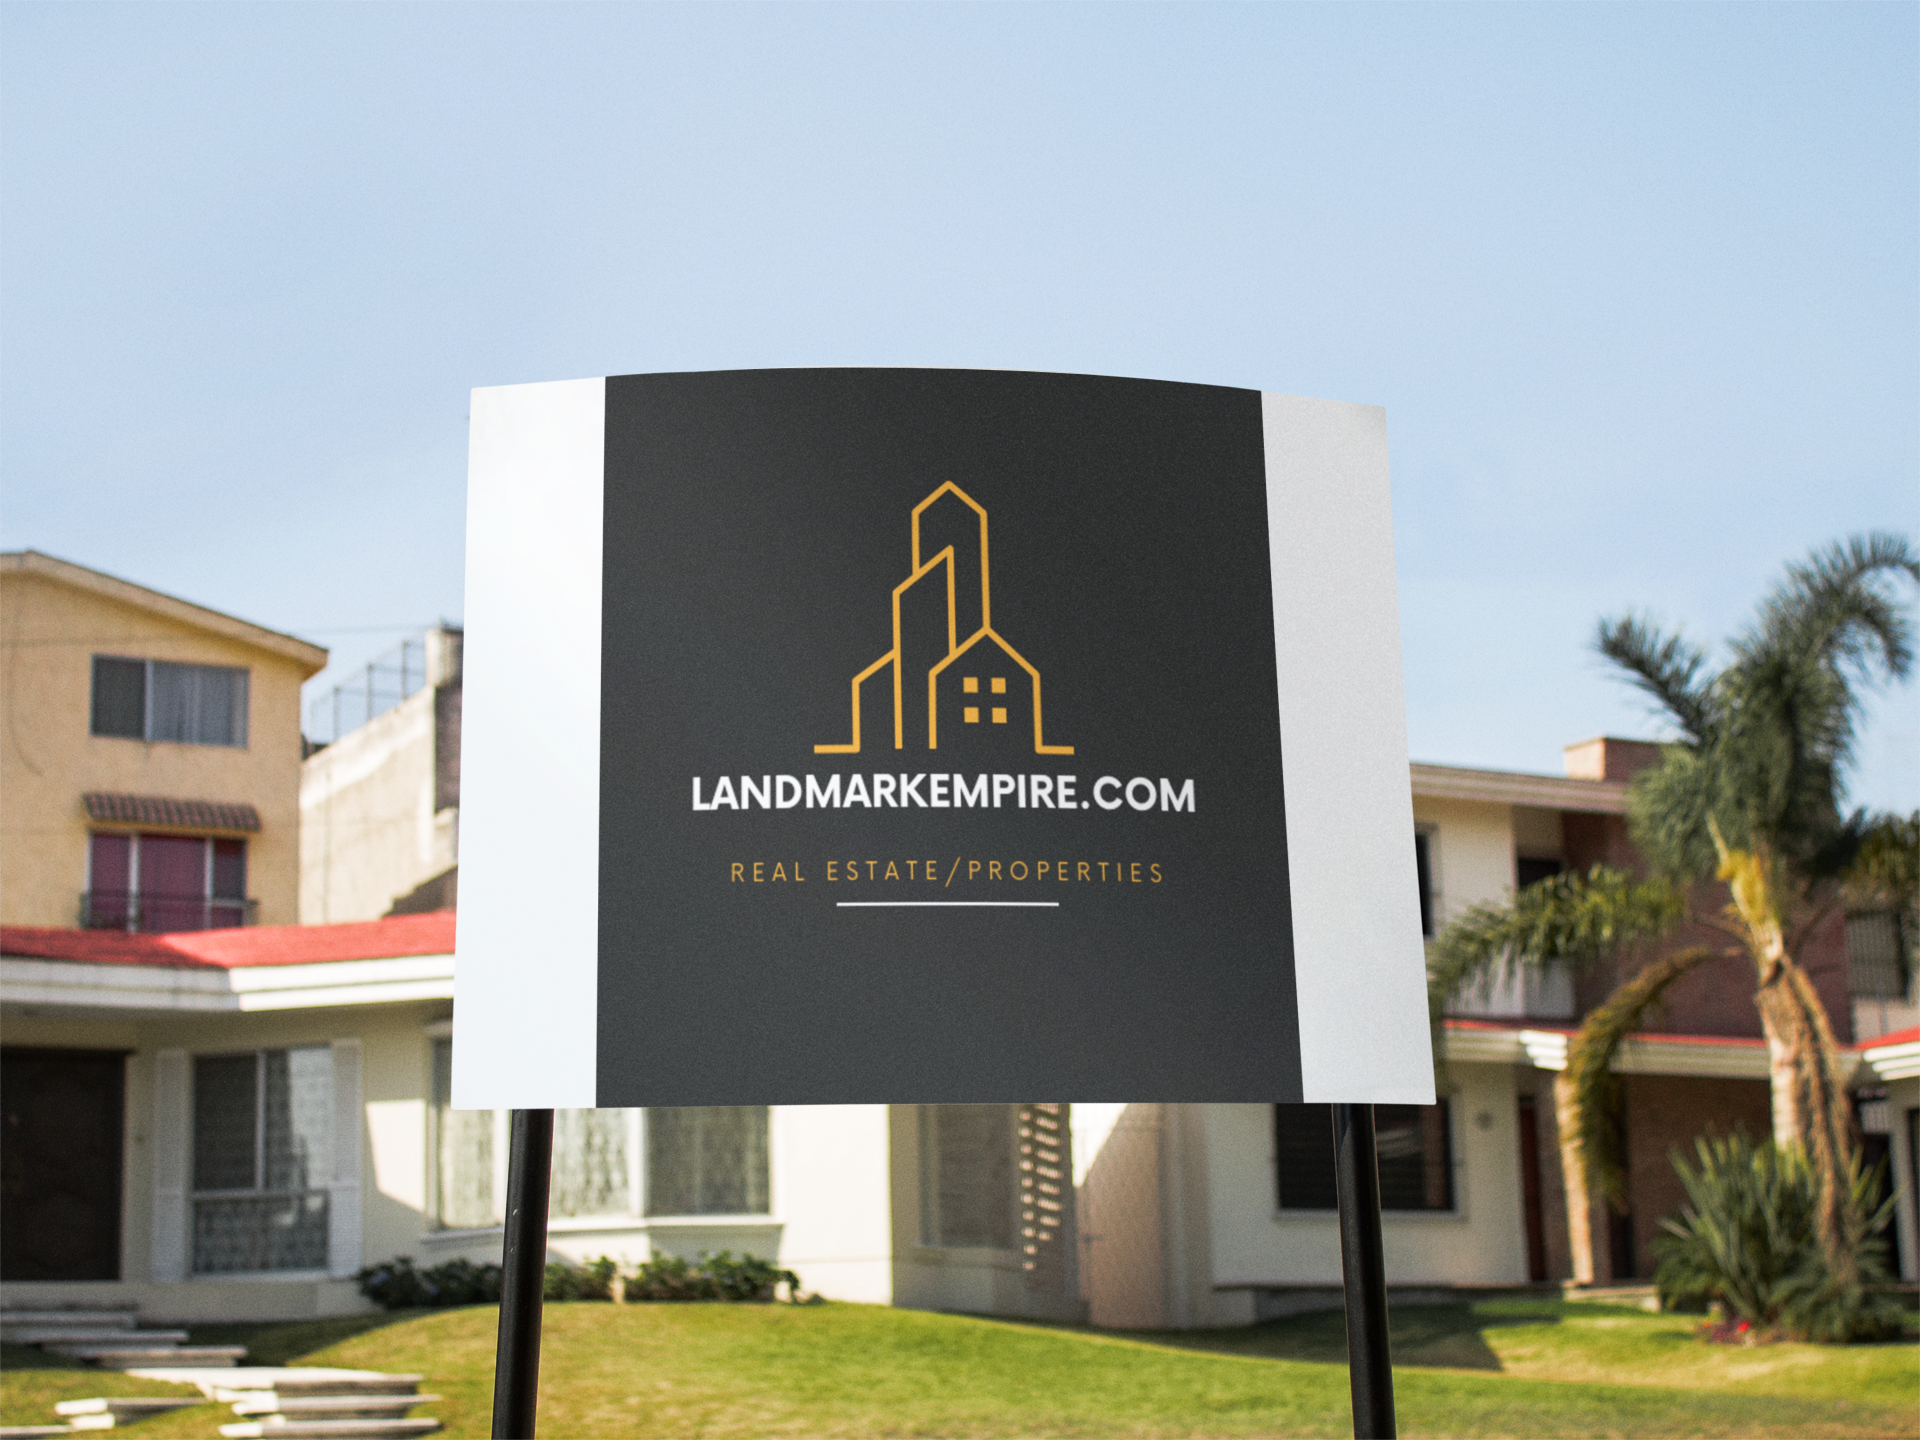 mockup-of-a-real-estate-lawn-sign-in-the-front-yard-of-a-house-a15014 (1)-1